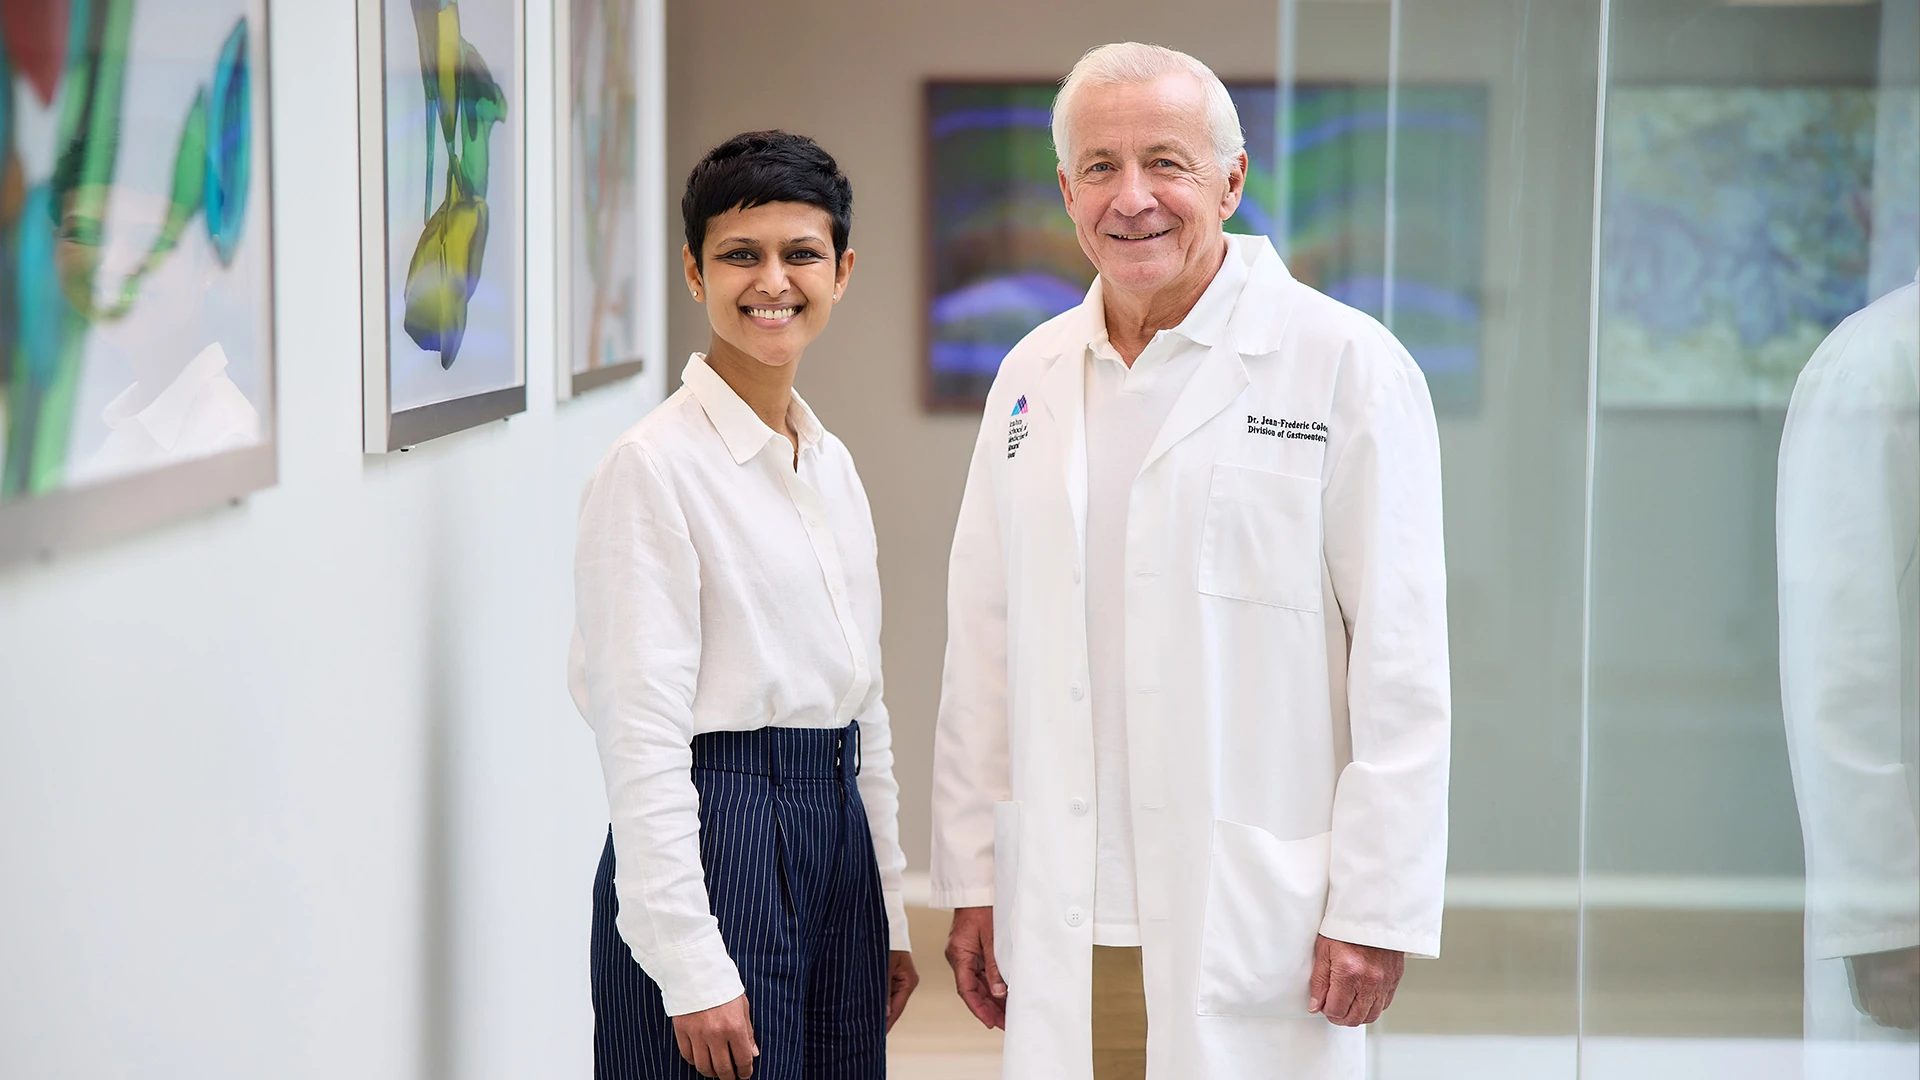 Manasi Agrawal, MD, MS, and Jean-Frederic Colombel, MD